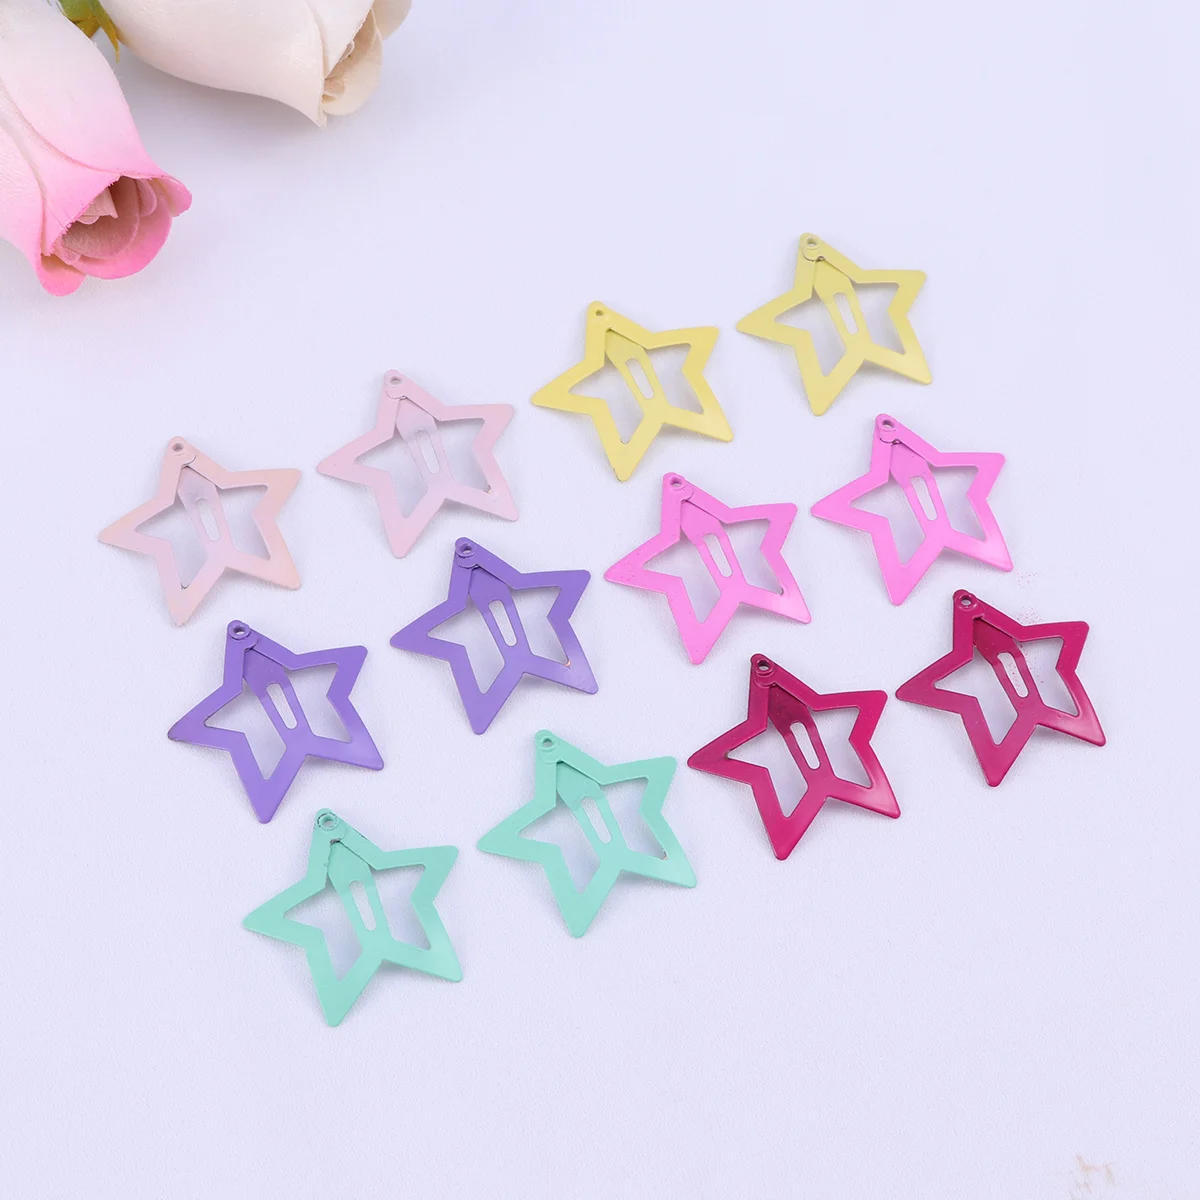 

12Pcs Lovely Stars Hair Clips Barrettes Hairpins Hair Accessories for Babies Girls Toddlers Children Kids Teens